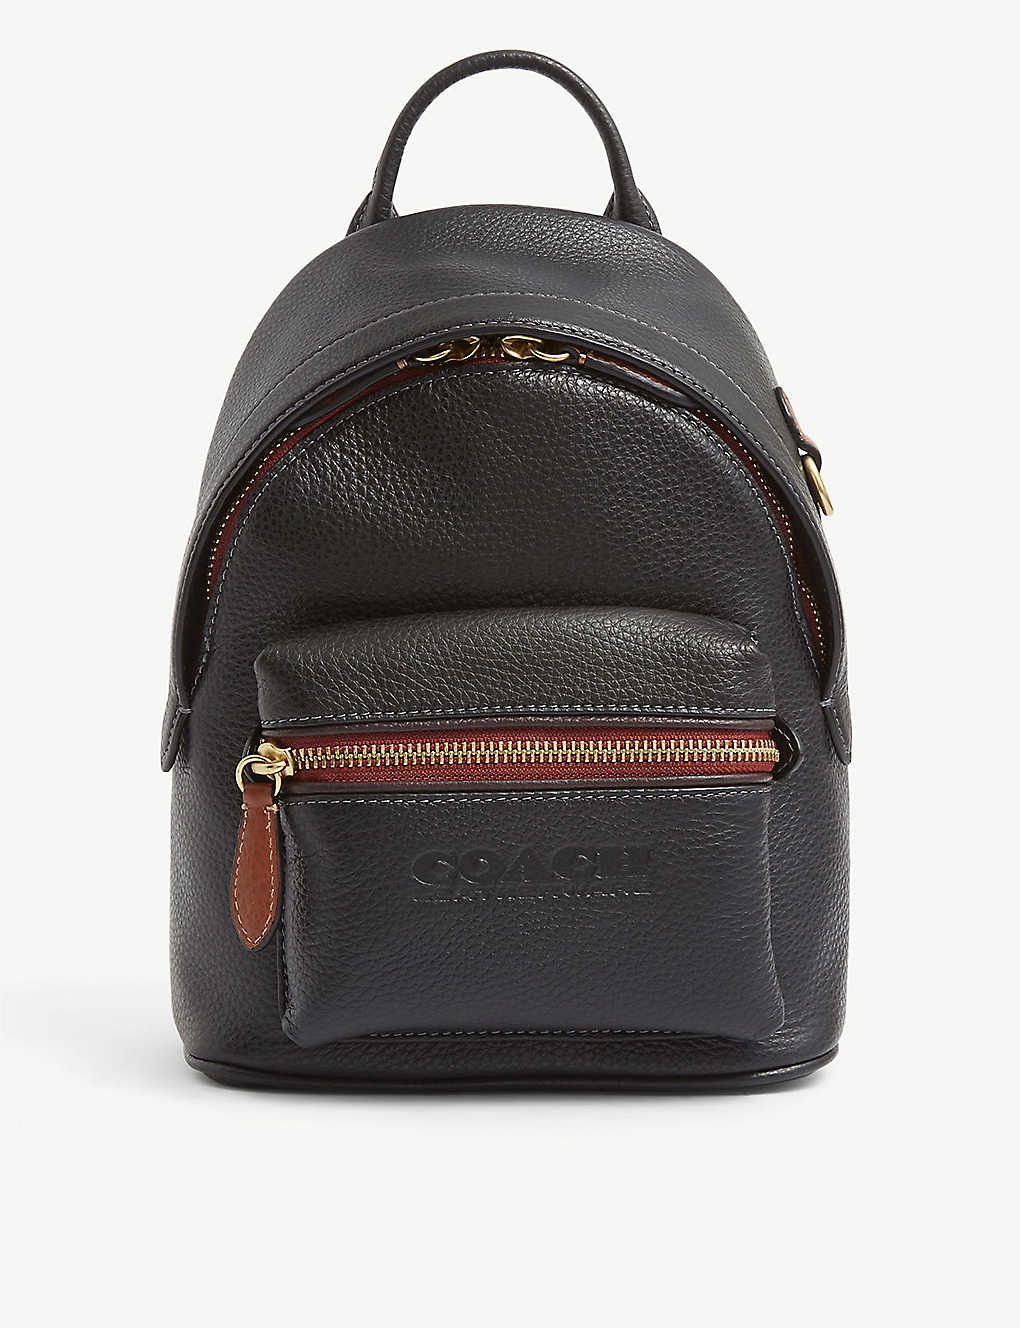 Charter leather backpack(9438190)